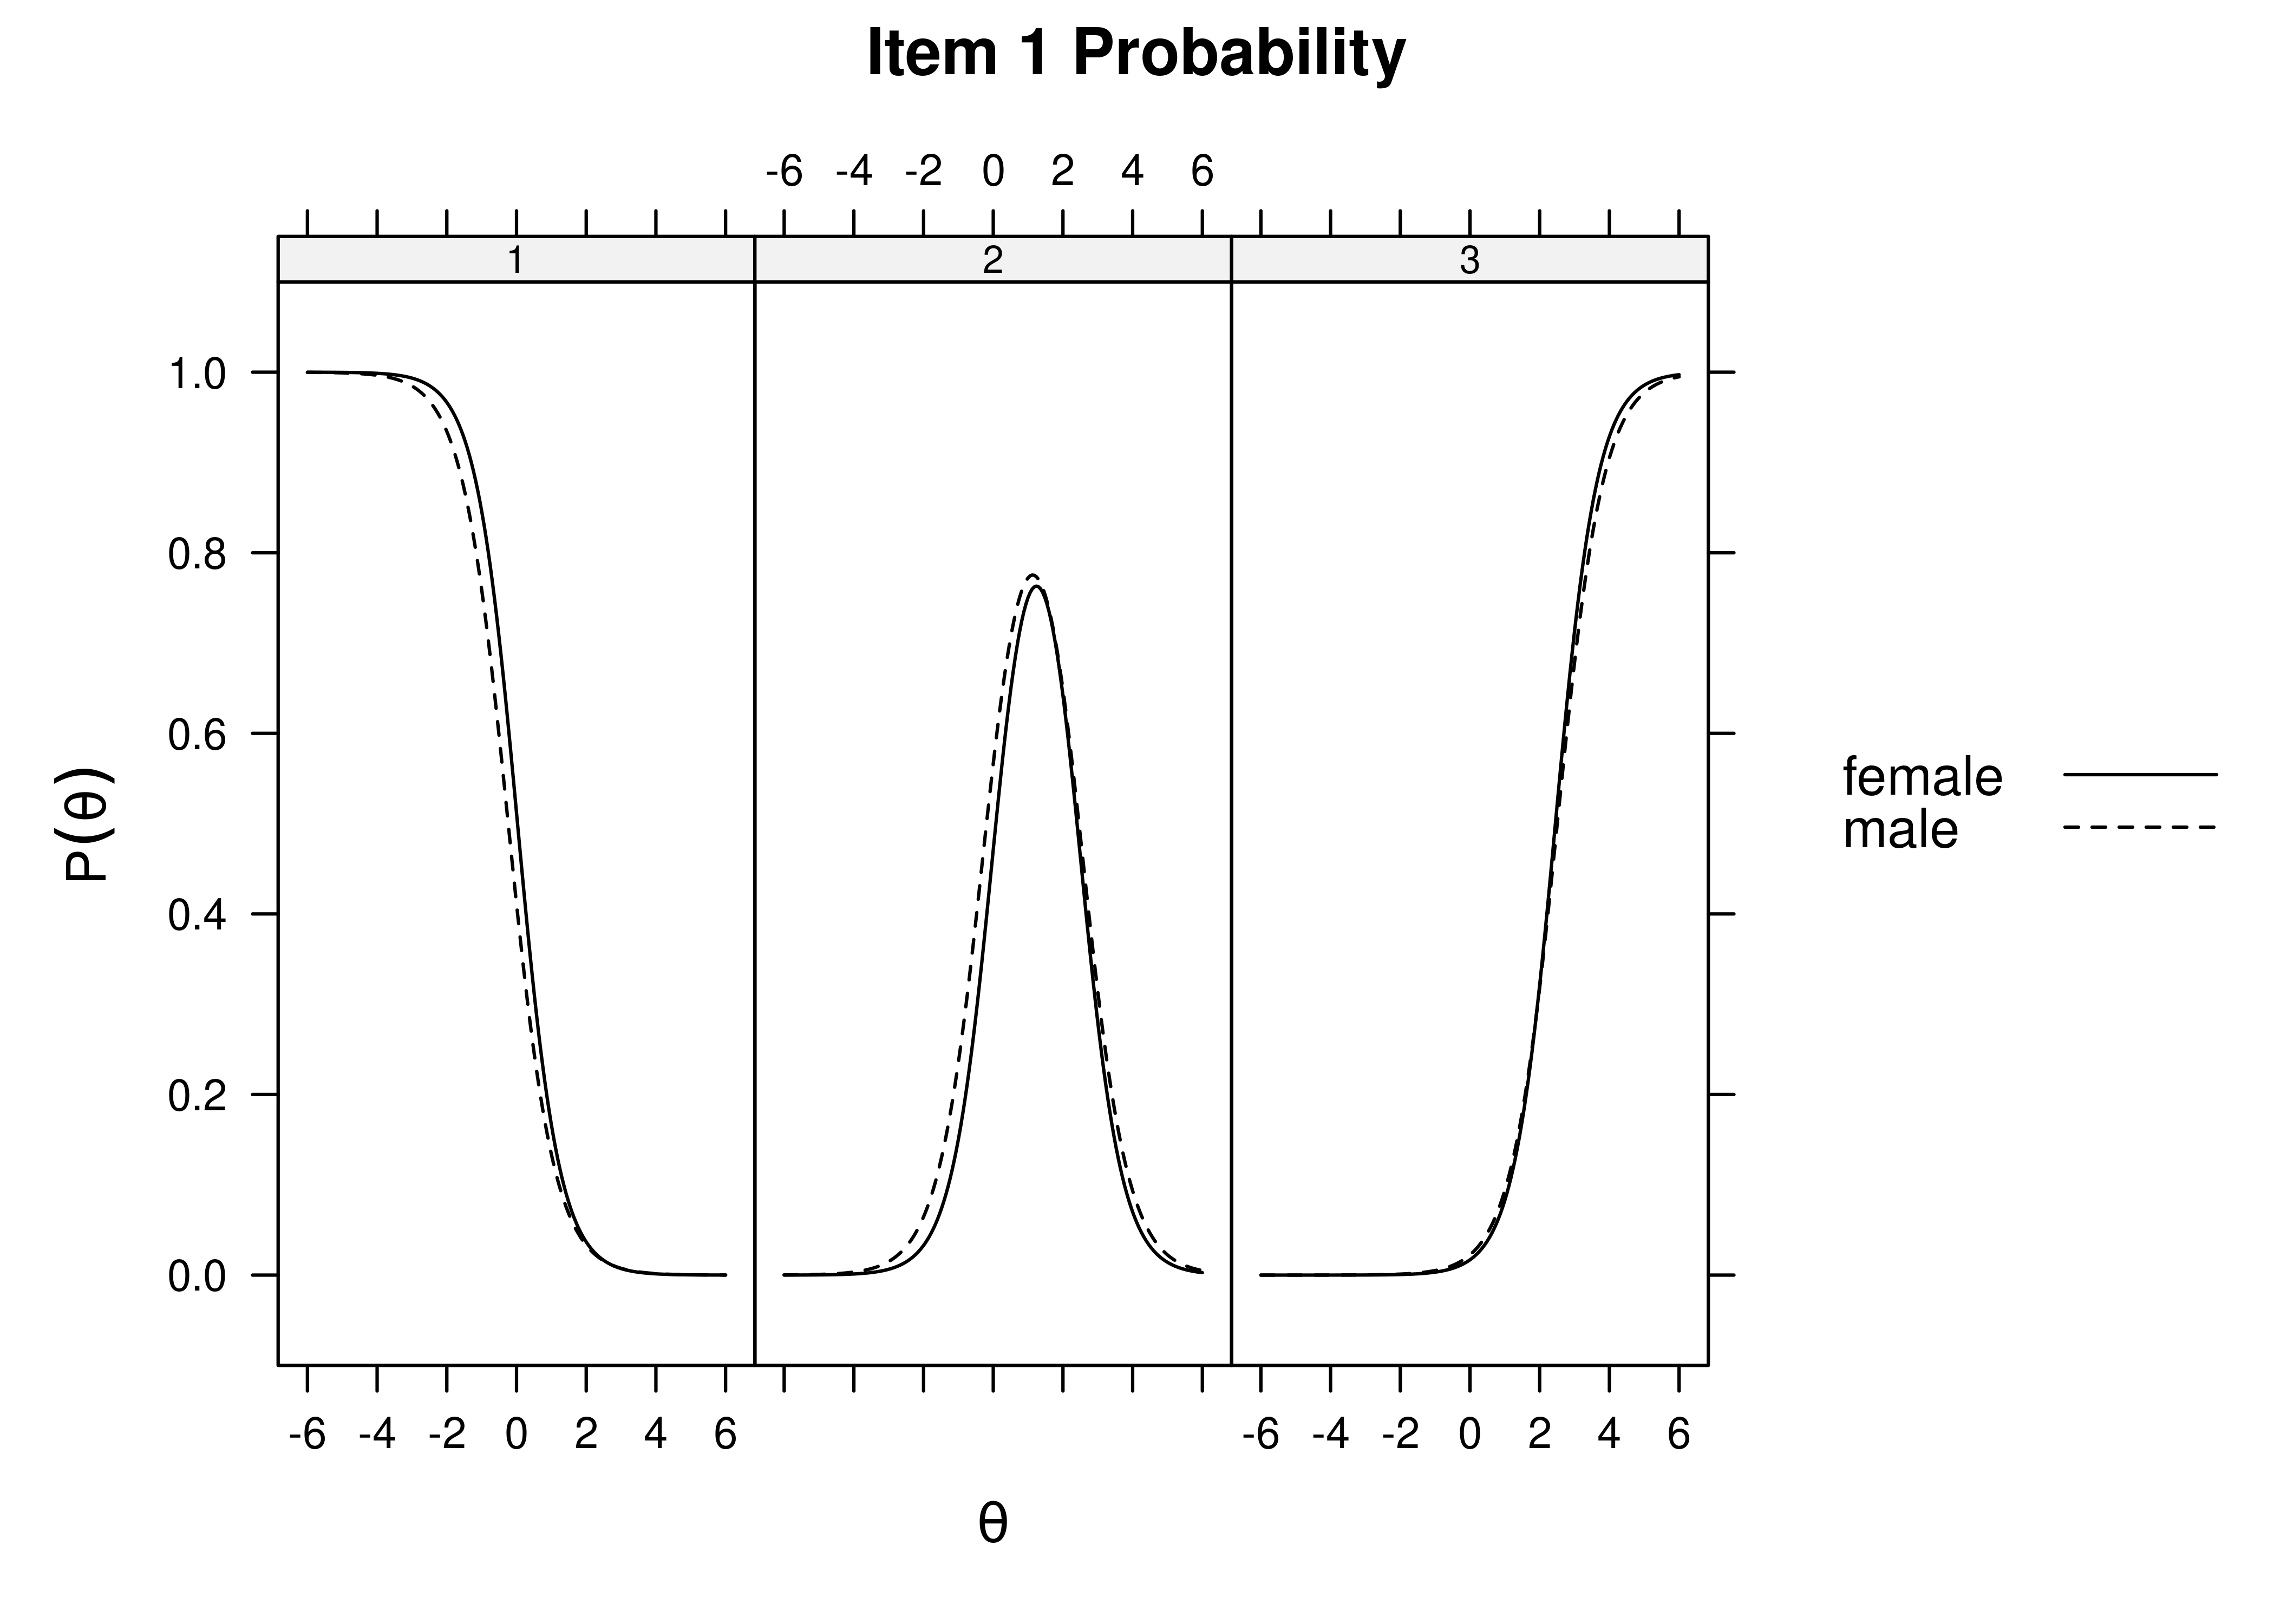 Item Response Category Characteristic Curves by Sex: Item 1.